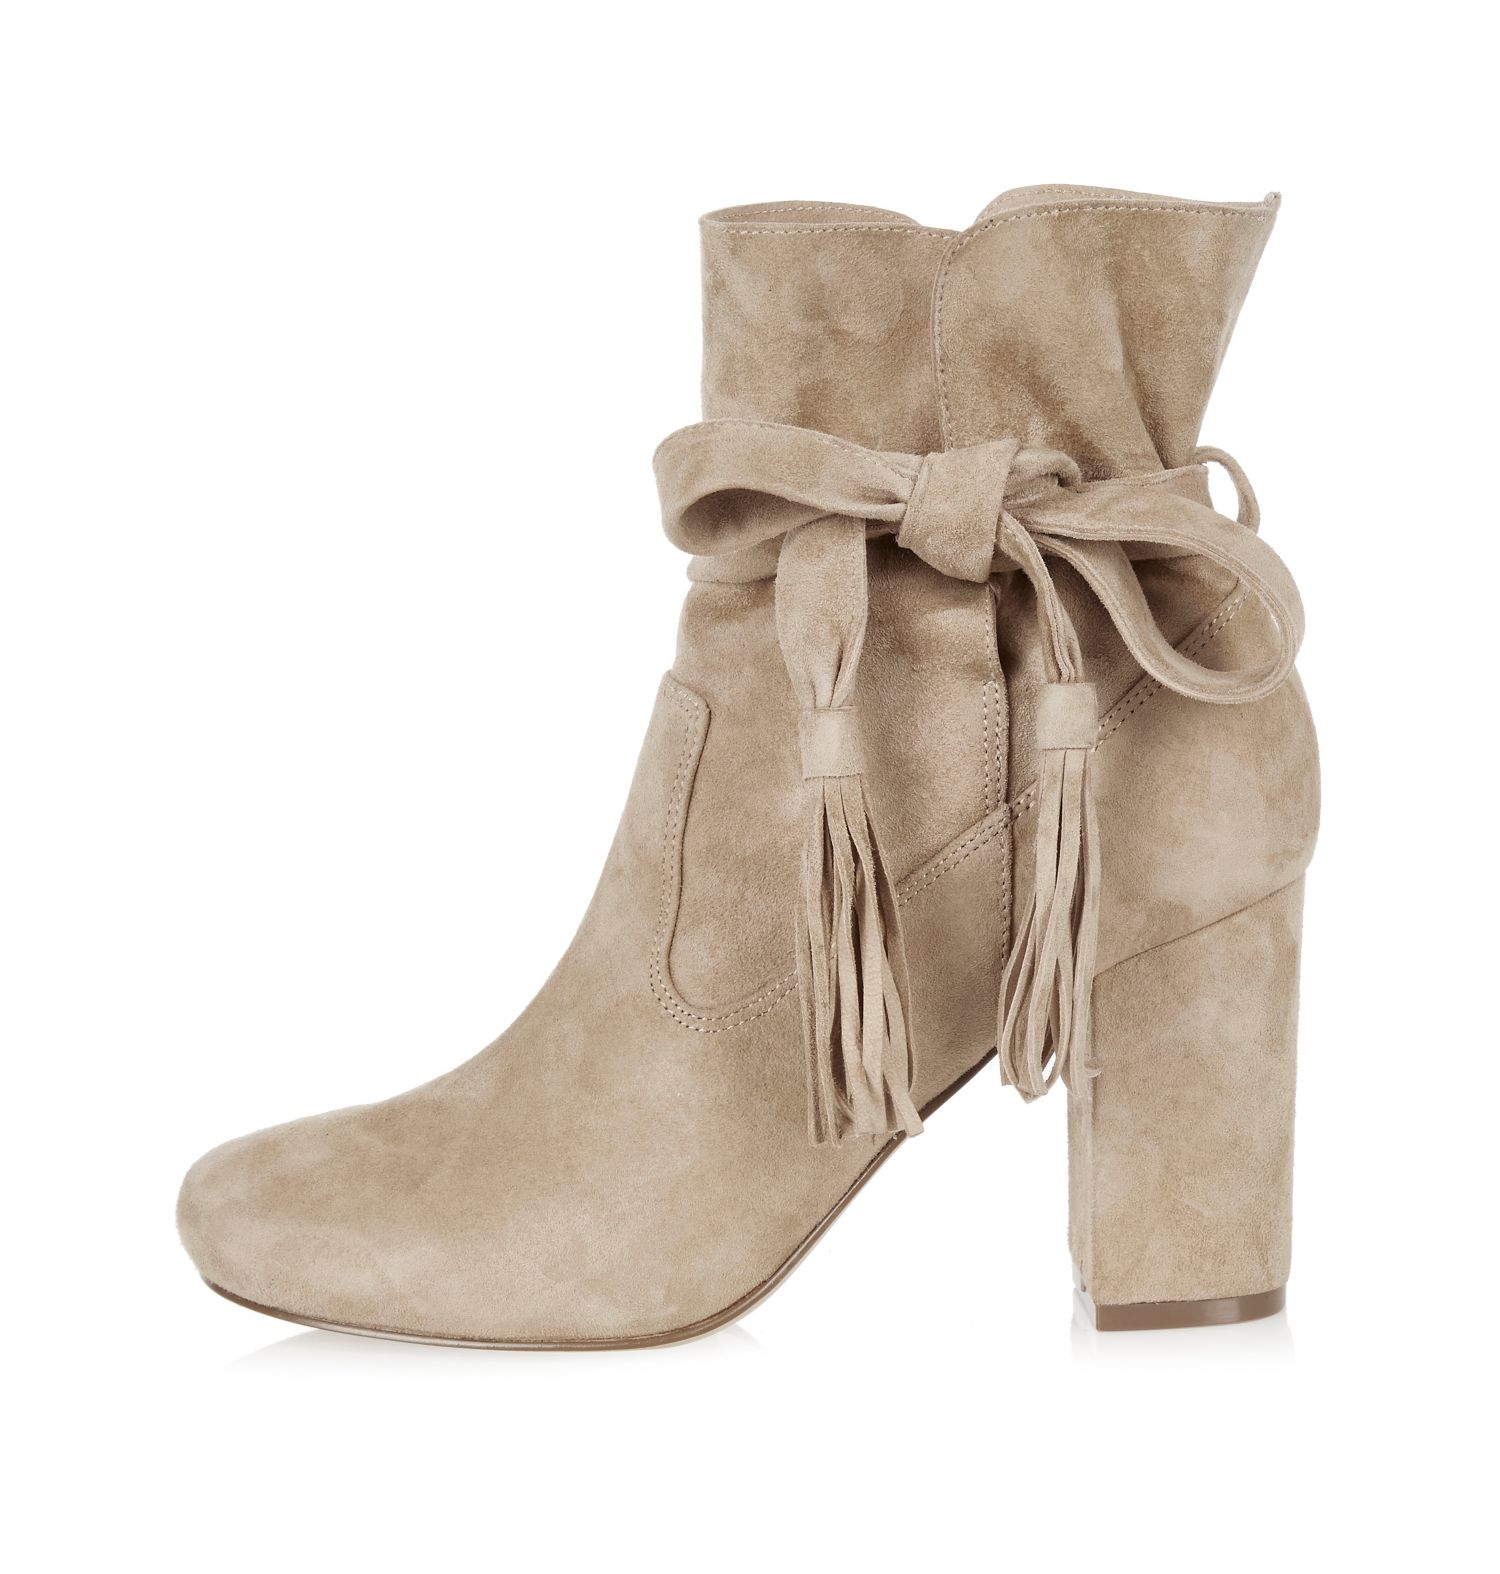 River Island Stone Suede Tassel Heeled Ankle Boots in Grey (Gray) - Lyst